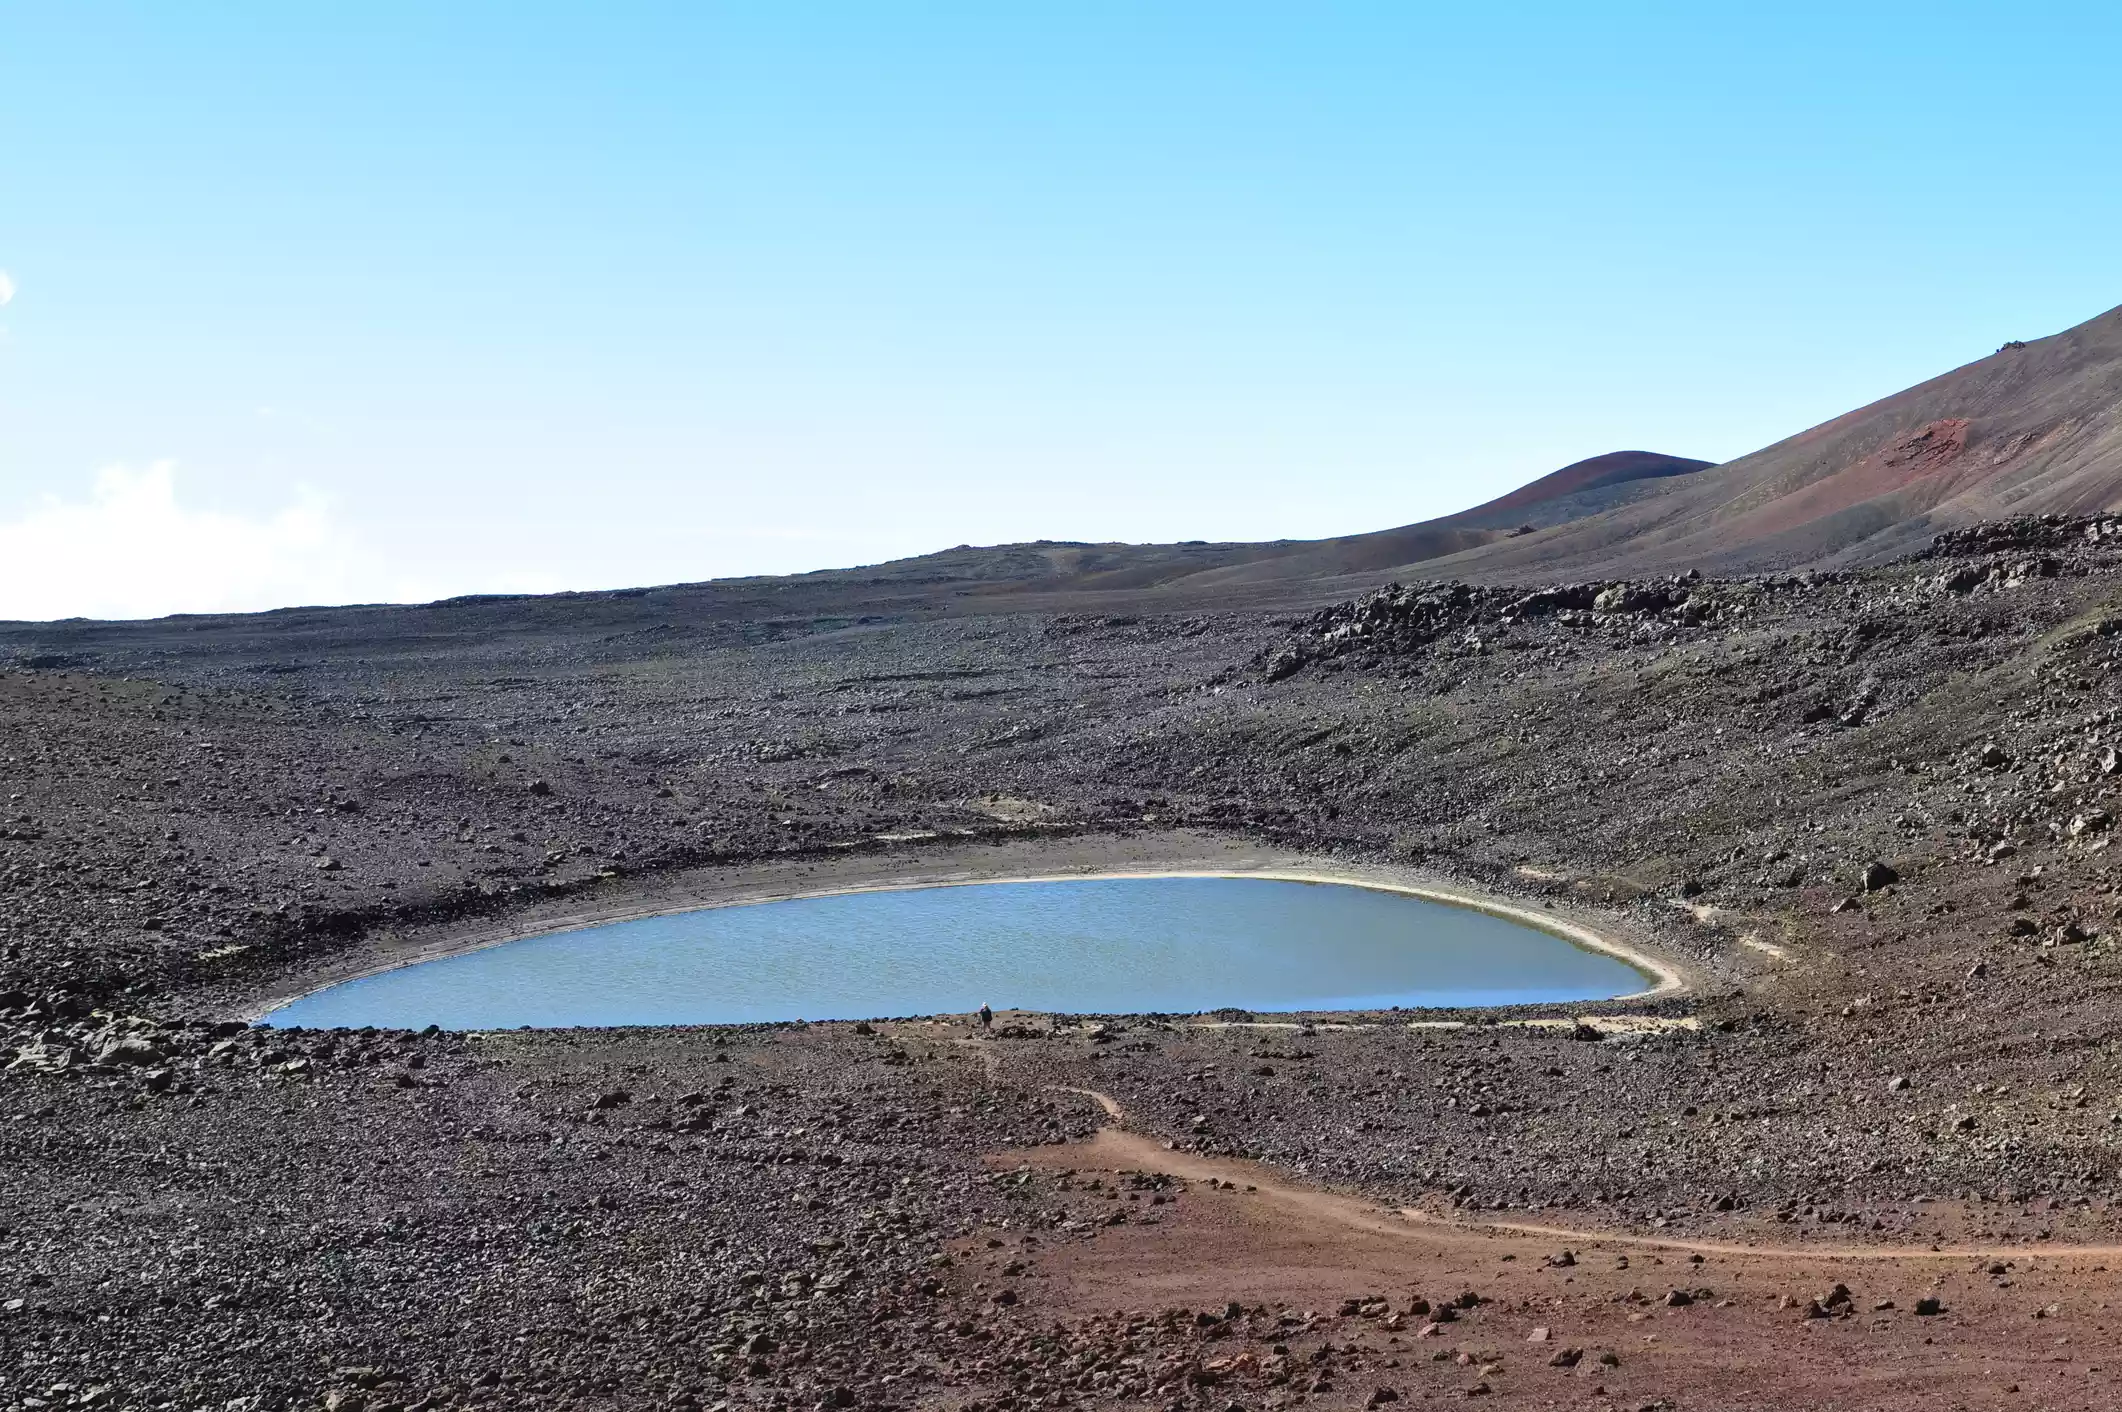 A small lake in a high, volcanic mountain environment